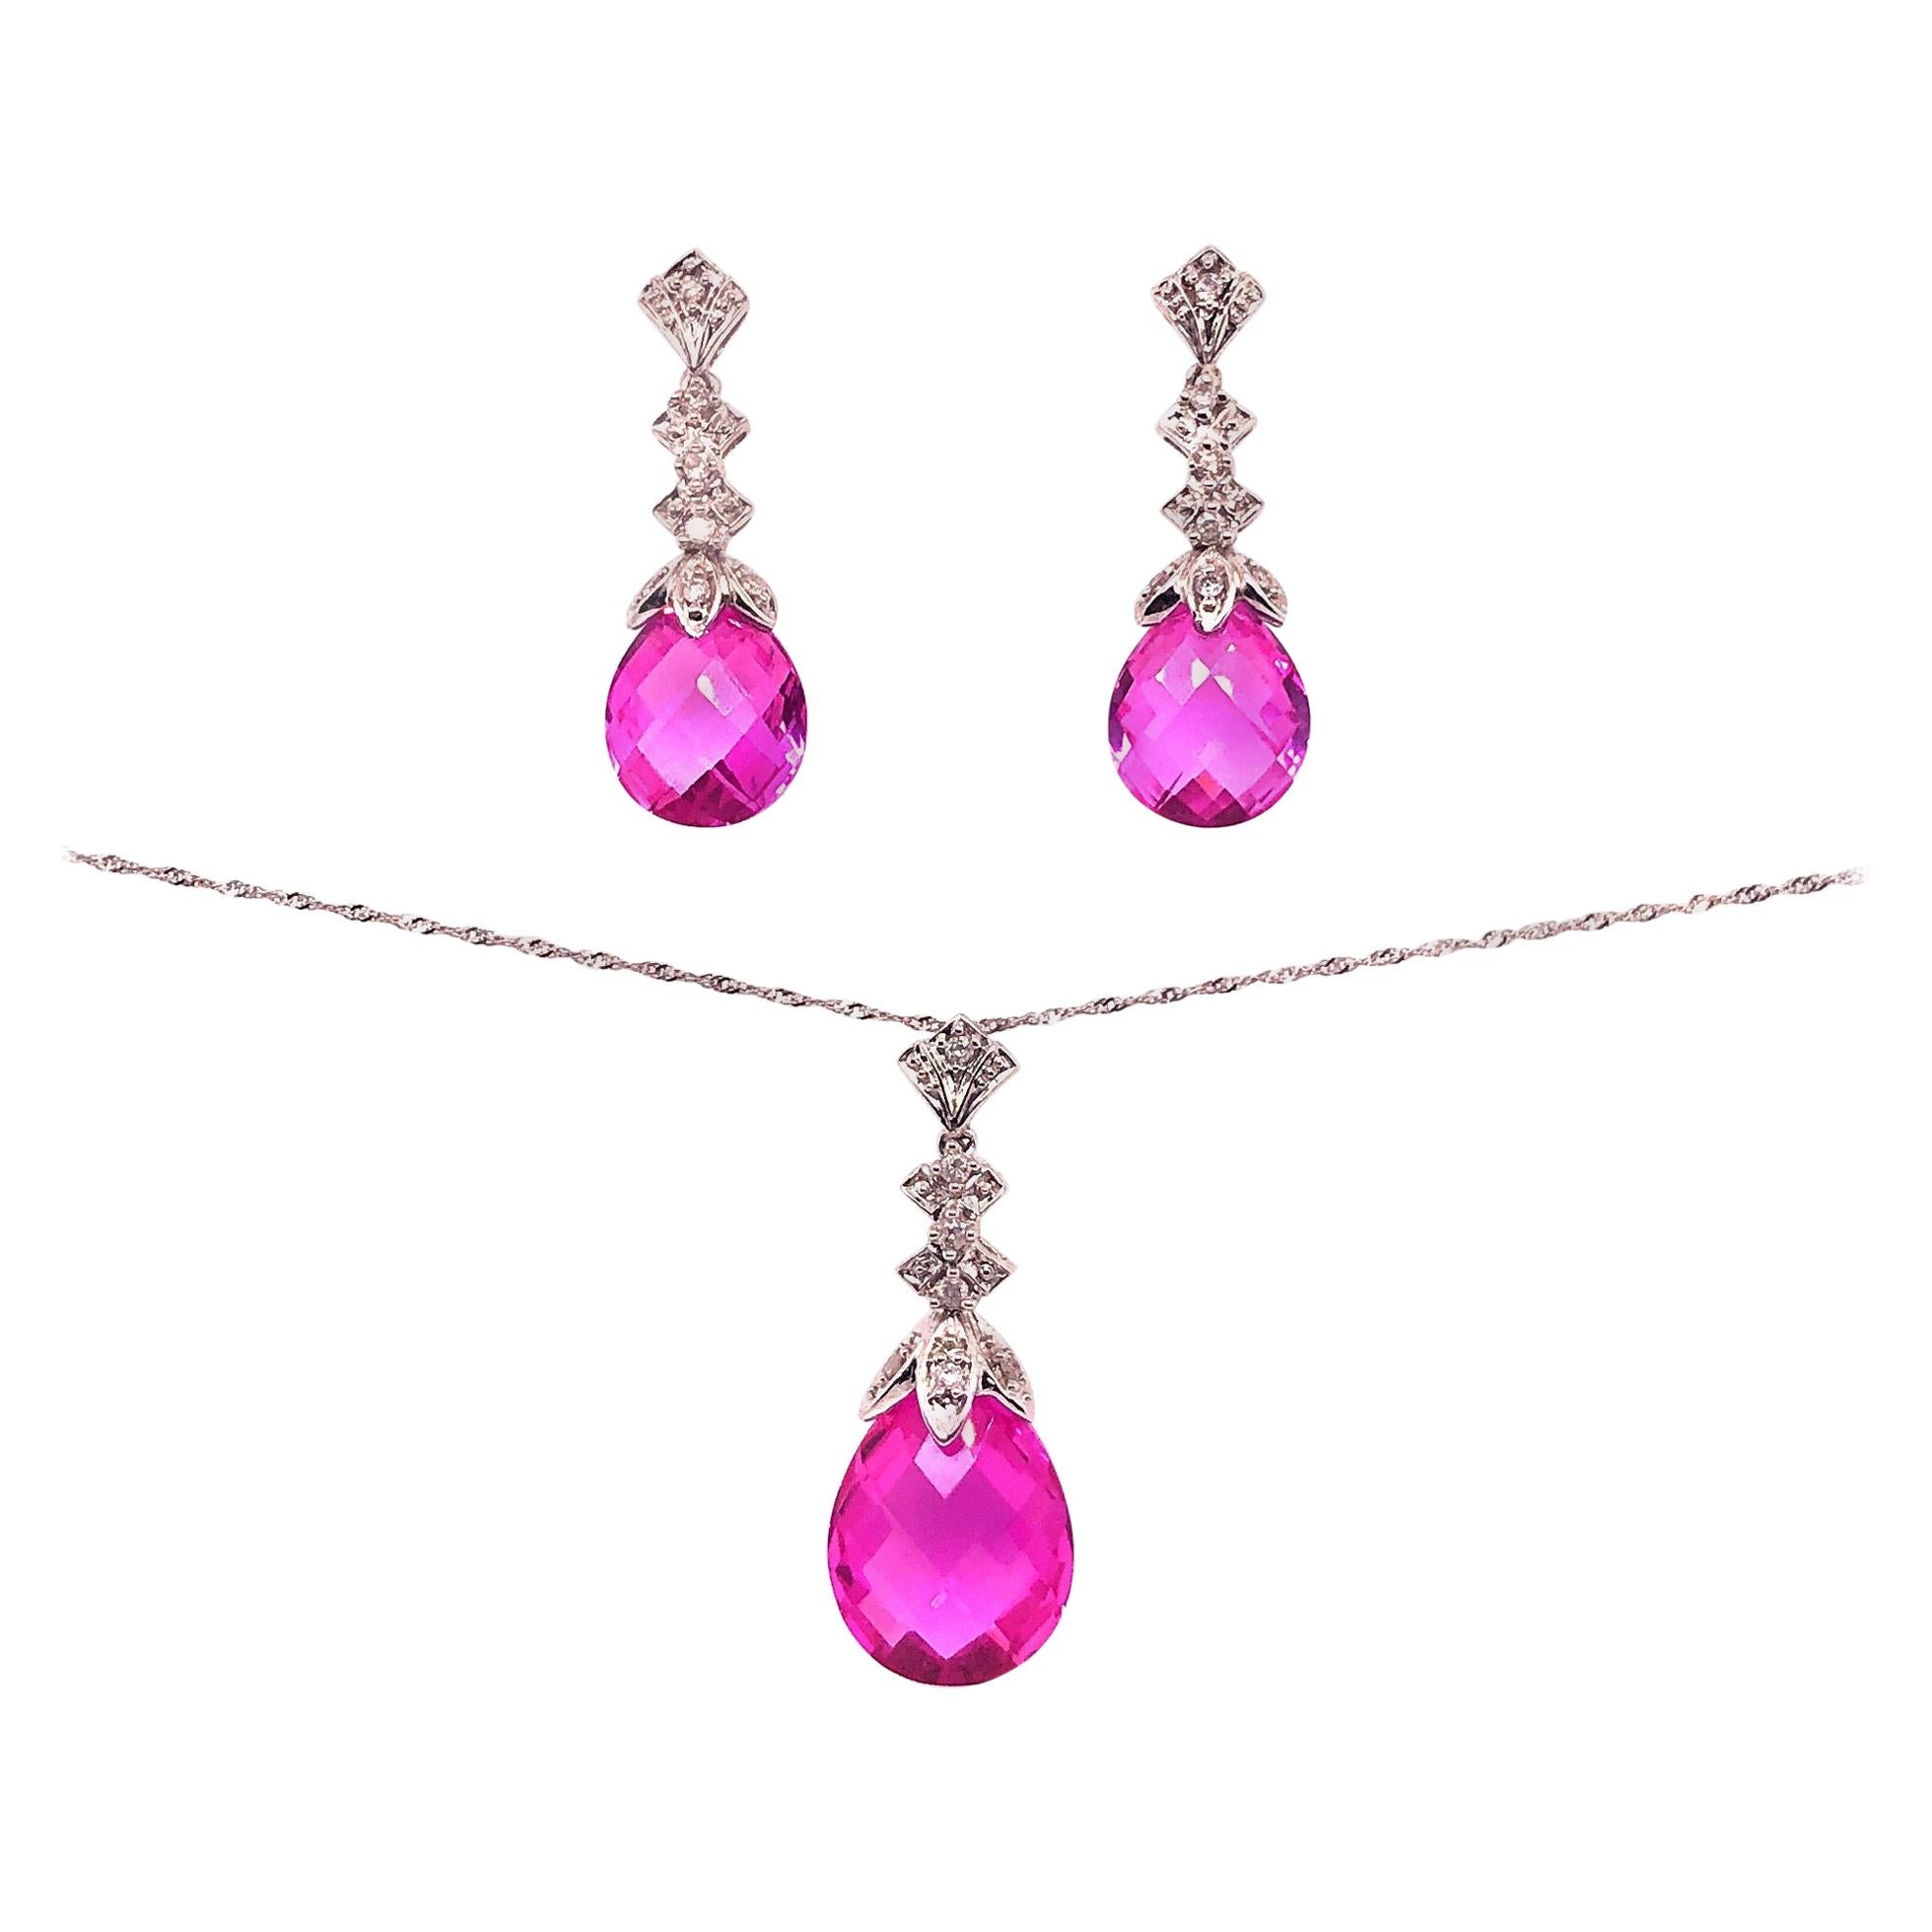 White Gold Diamond and Pink Stone Earrings and Necklace